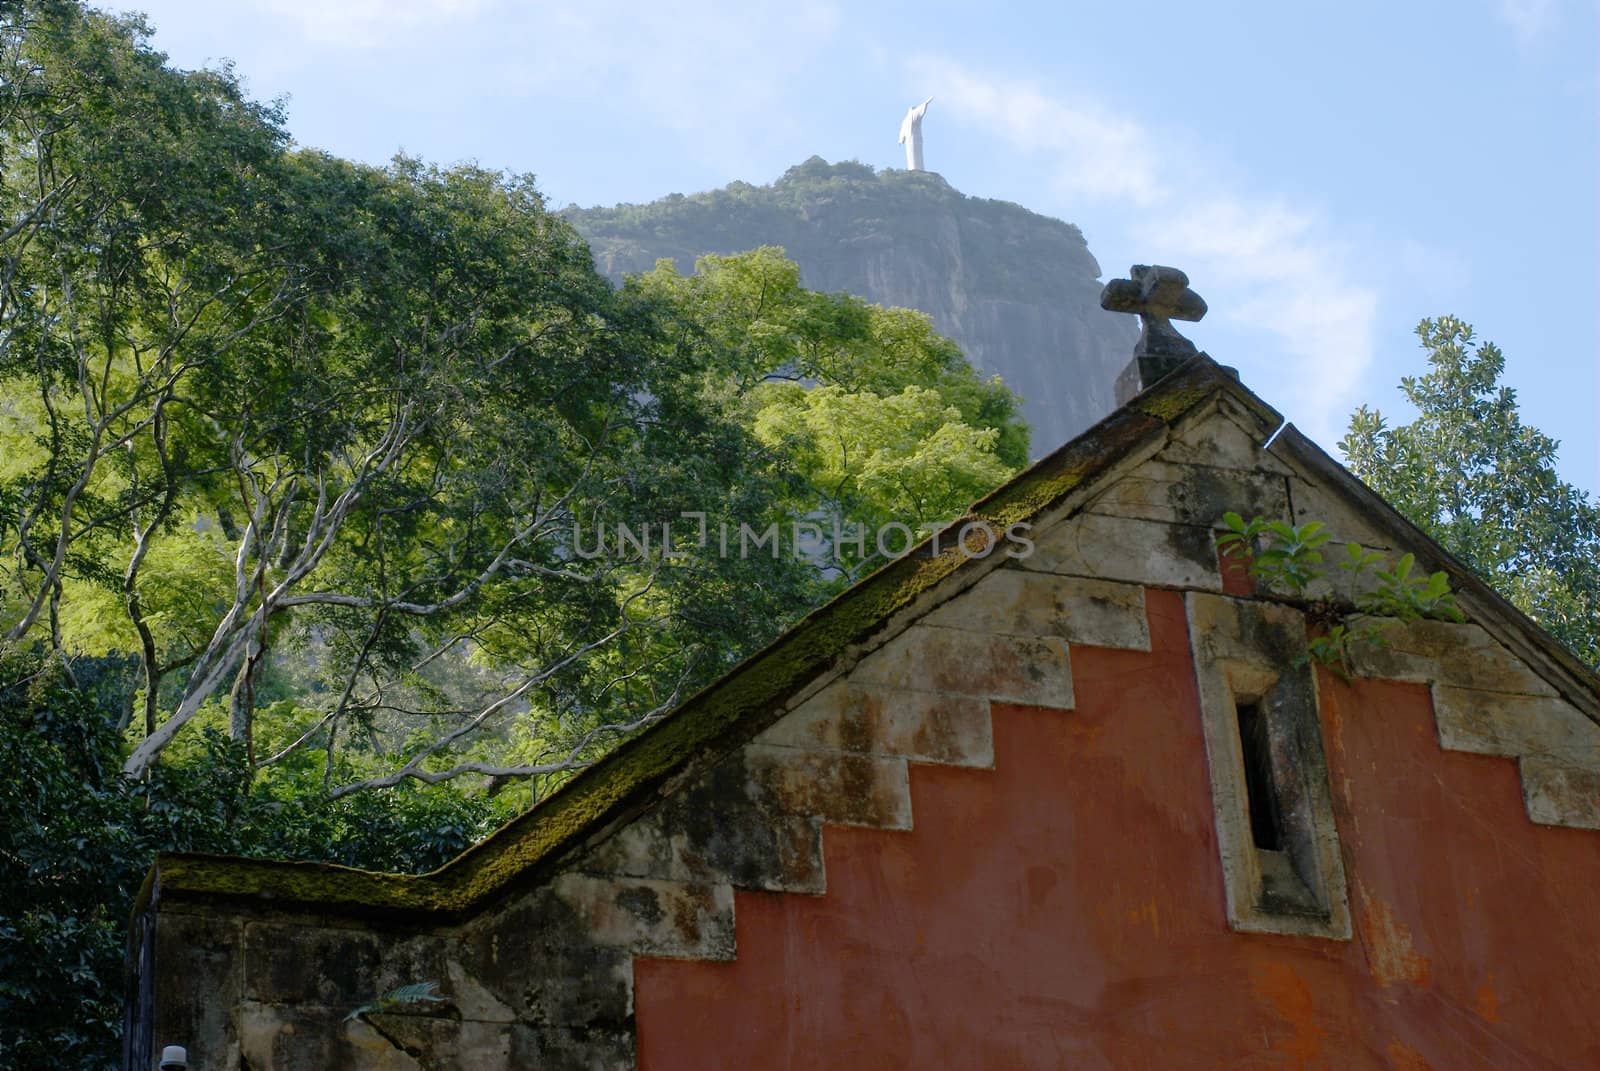 The old red house and the Corcovado Christ Statue view